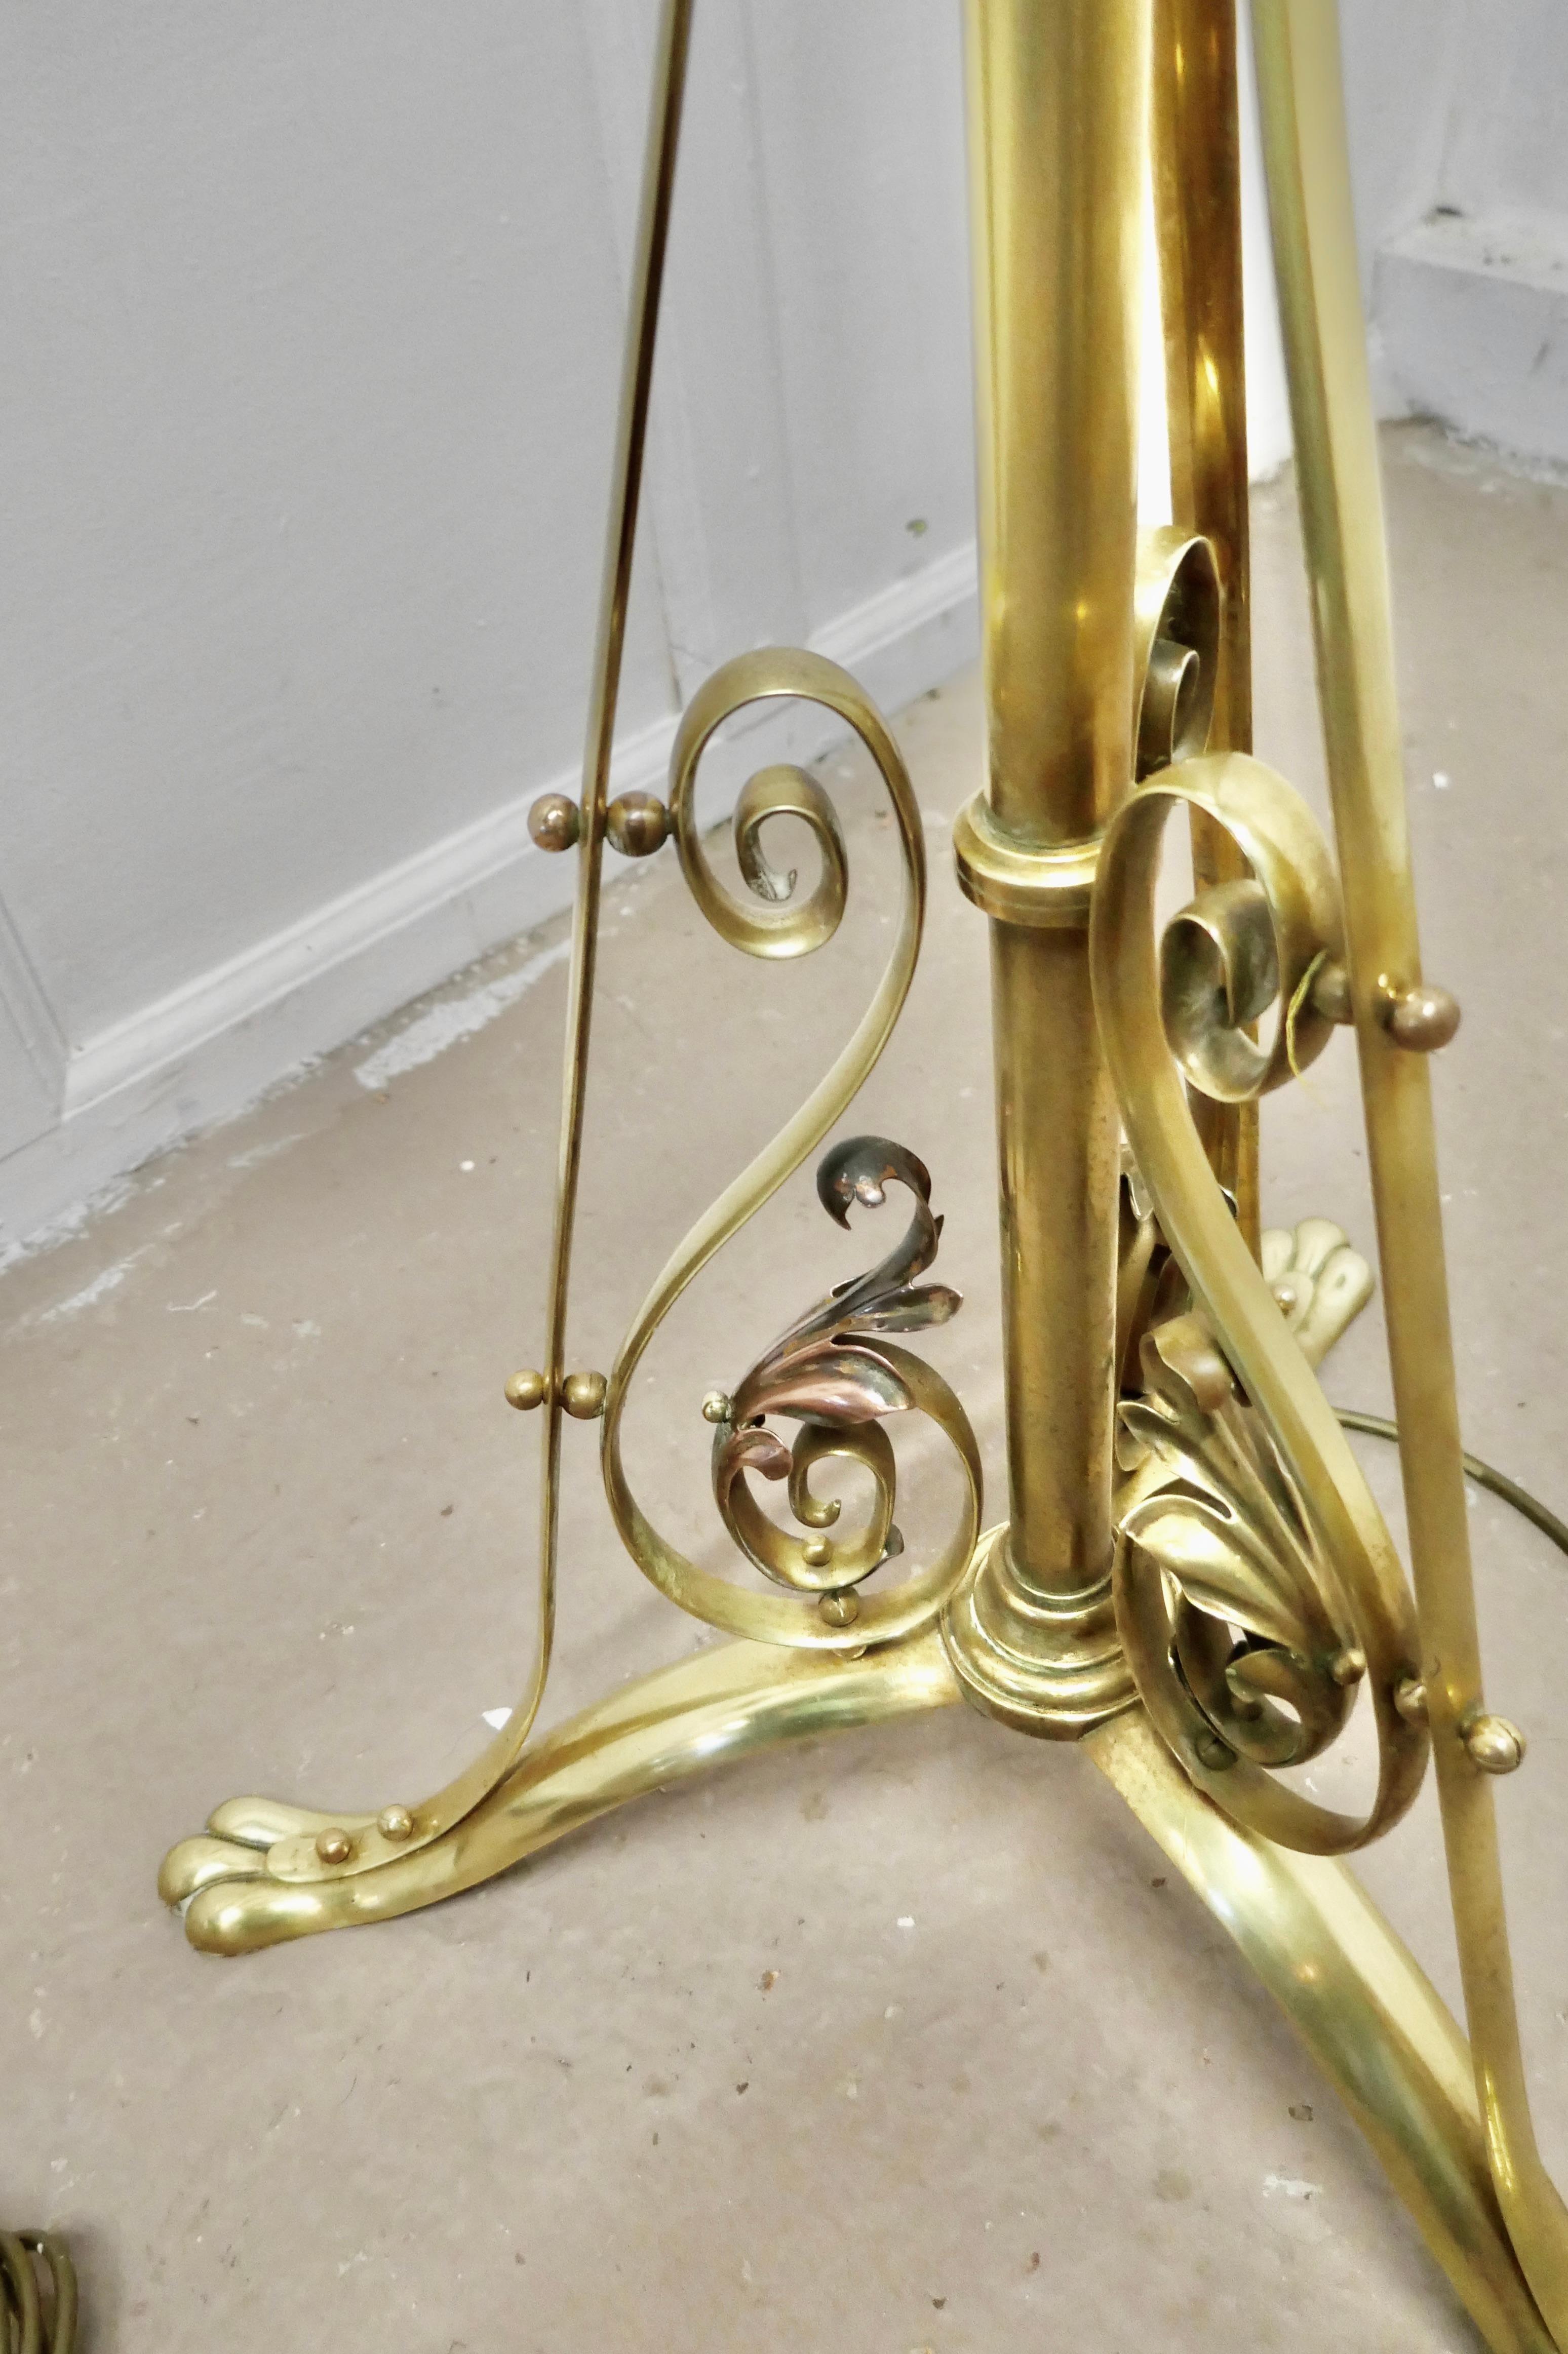 Adjustable brass floor lamp in the Arts & Crafts style

This is a very attractive piece, the lamp has a telescopic action and a decorative wrought brass base, the upright can be extended to raise the height of the lamp

The lamp has relatively